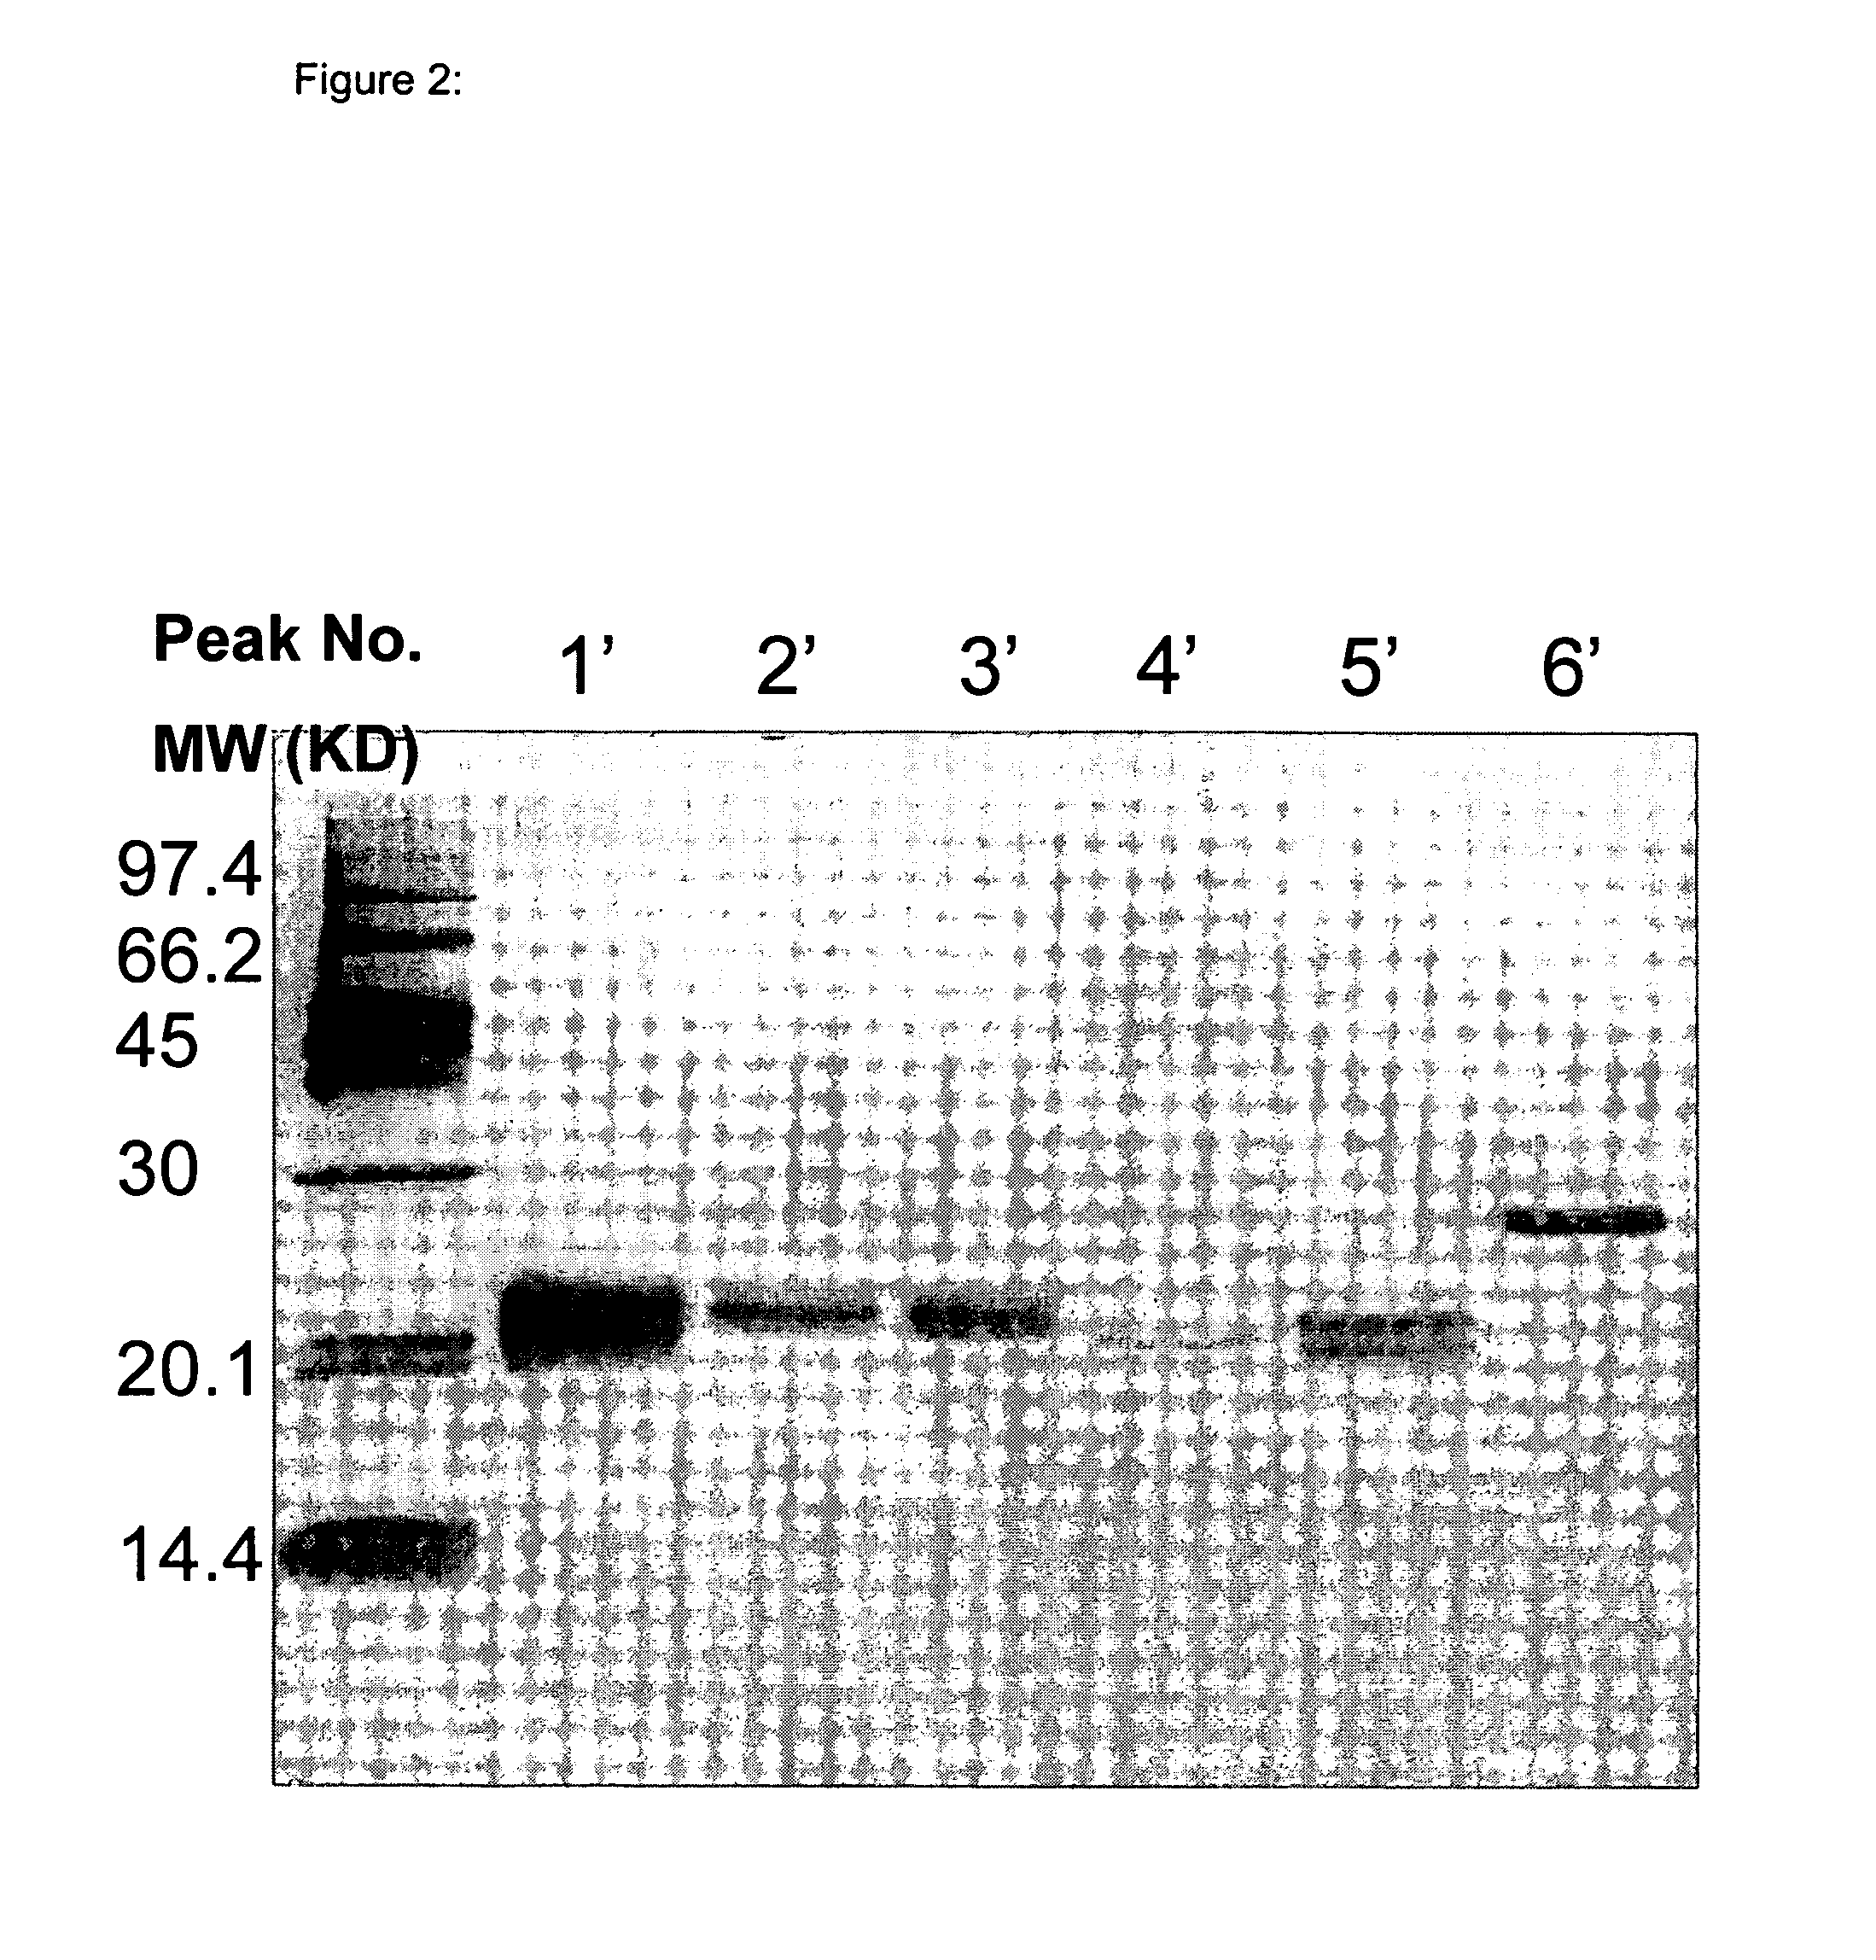 Composition comprising mixtures of IFN-alpha subtypes